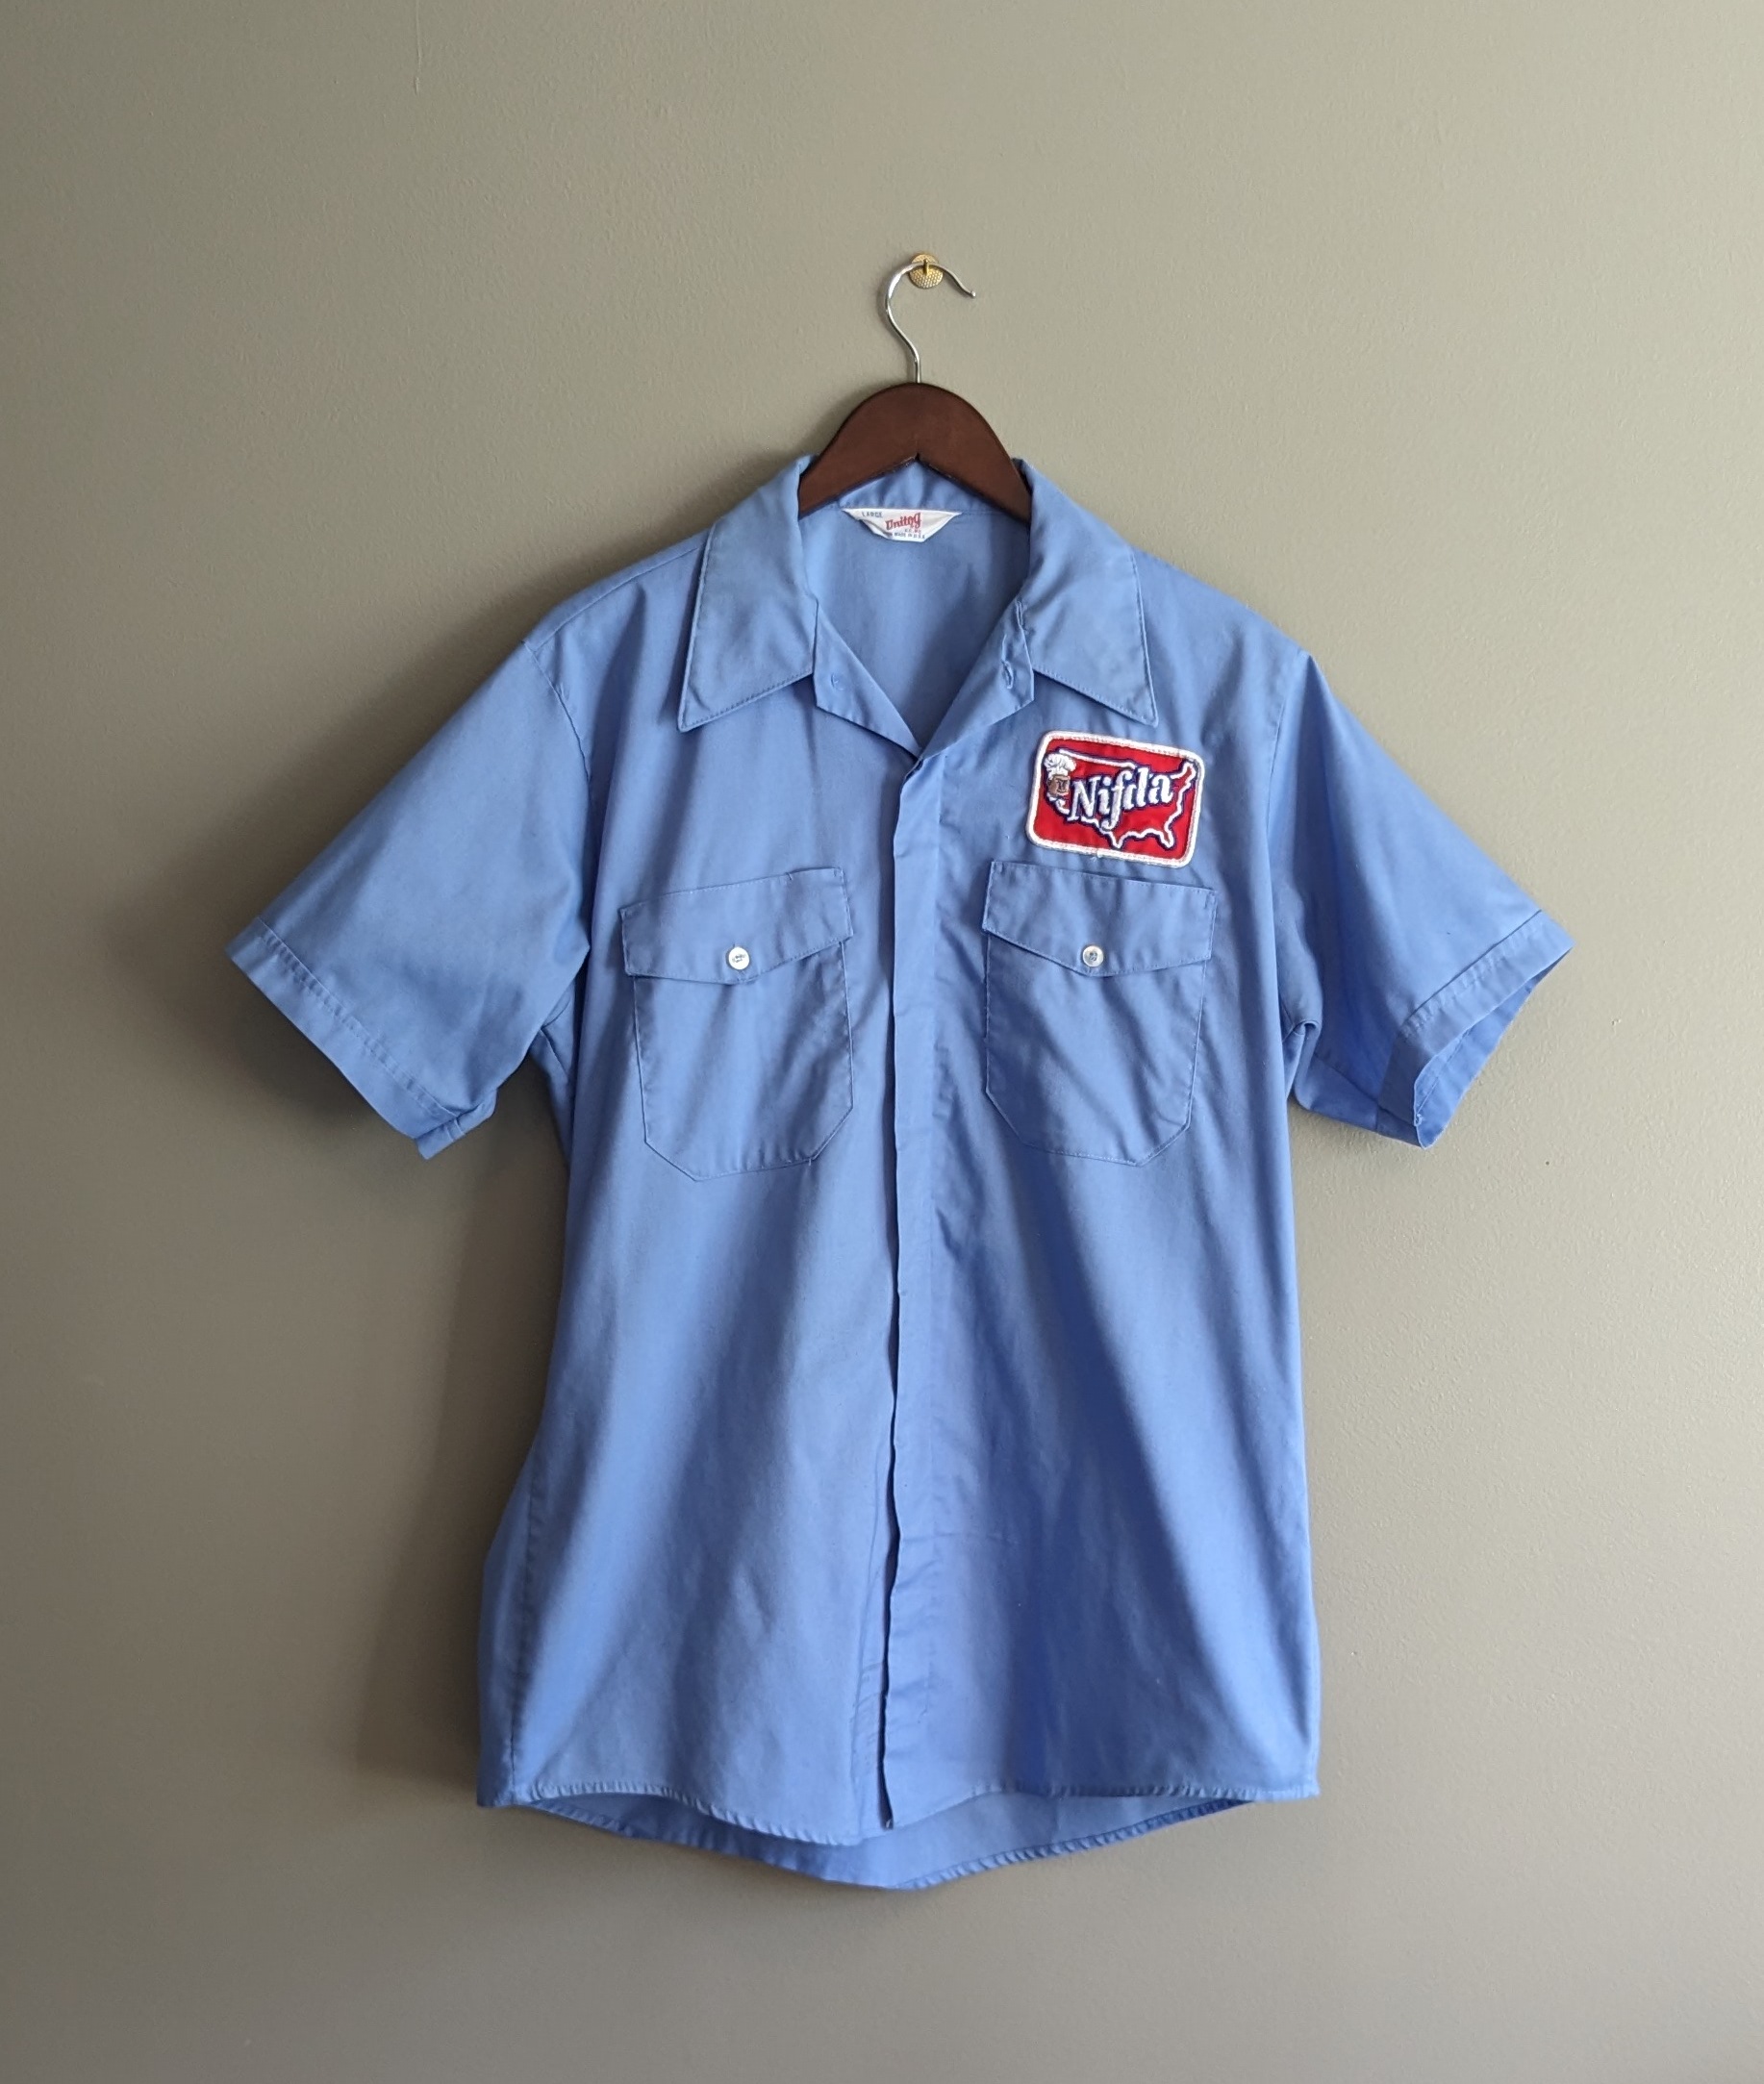 Vintage Uniform Shirt from the 1980’s Unitog Nifda